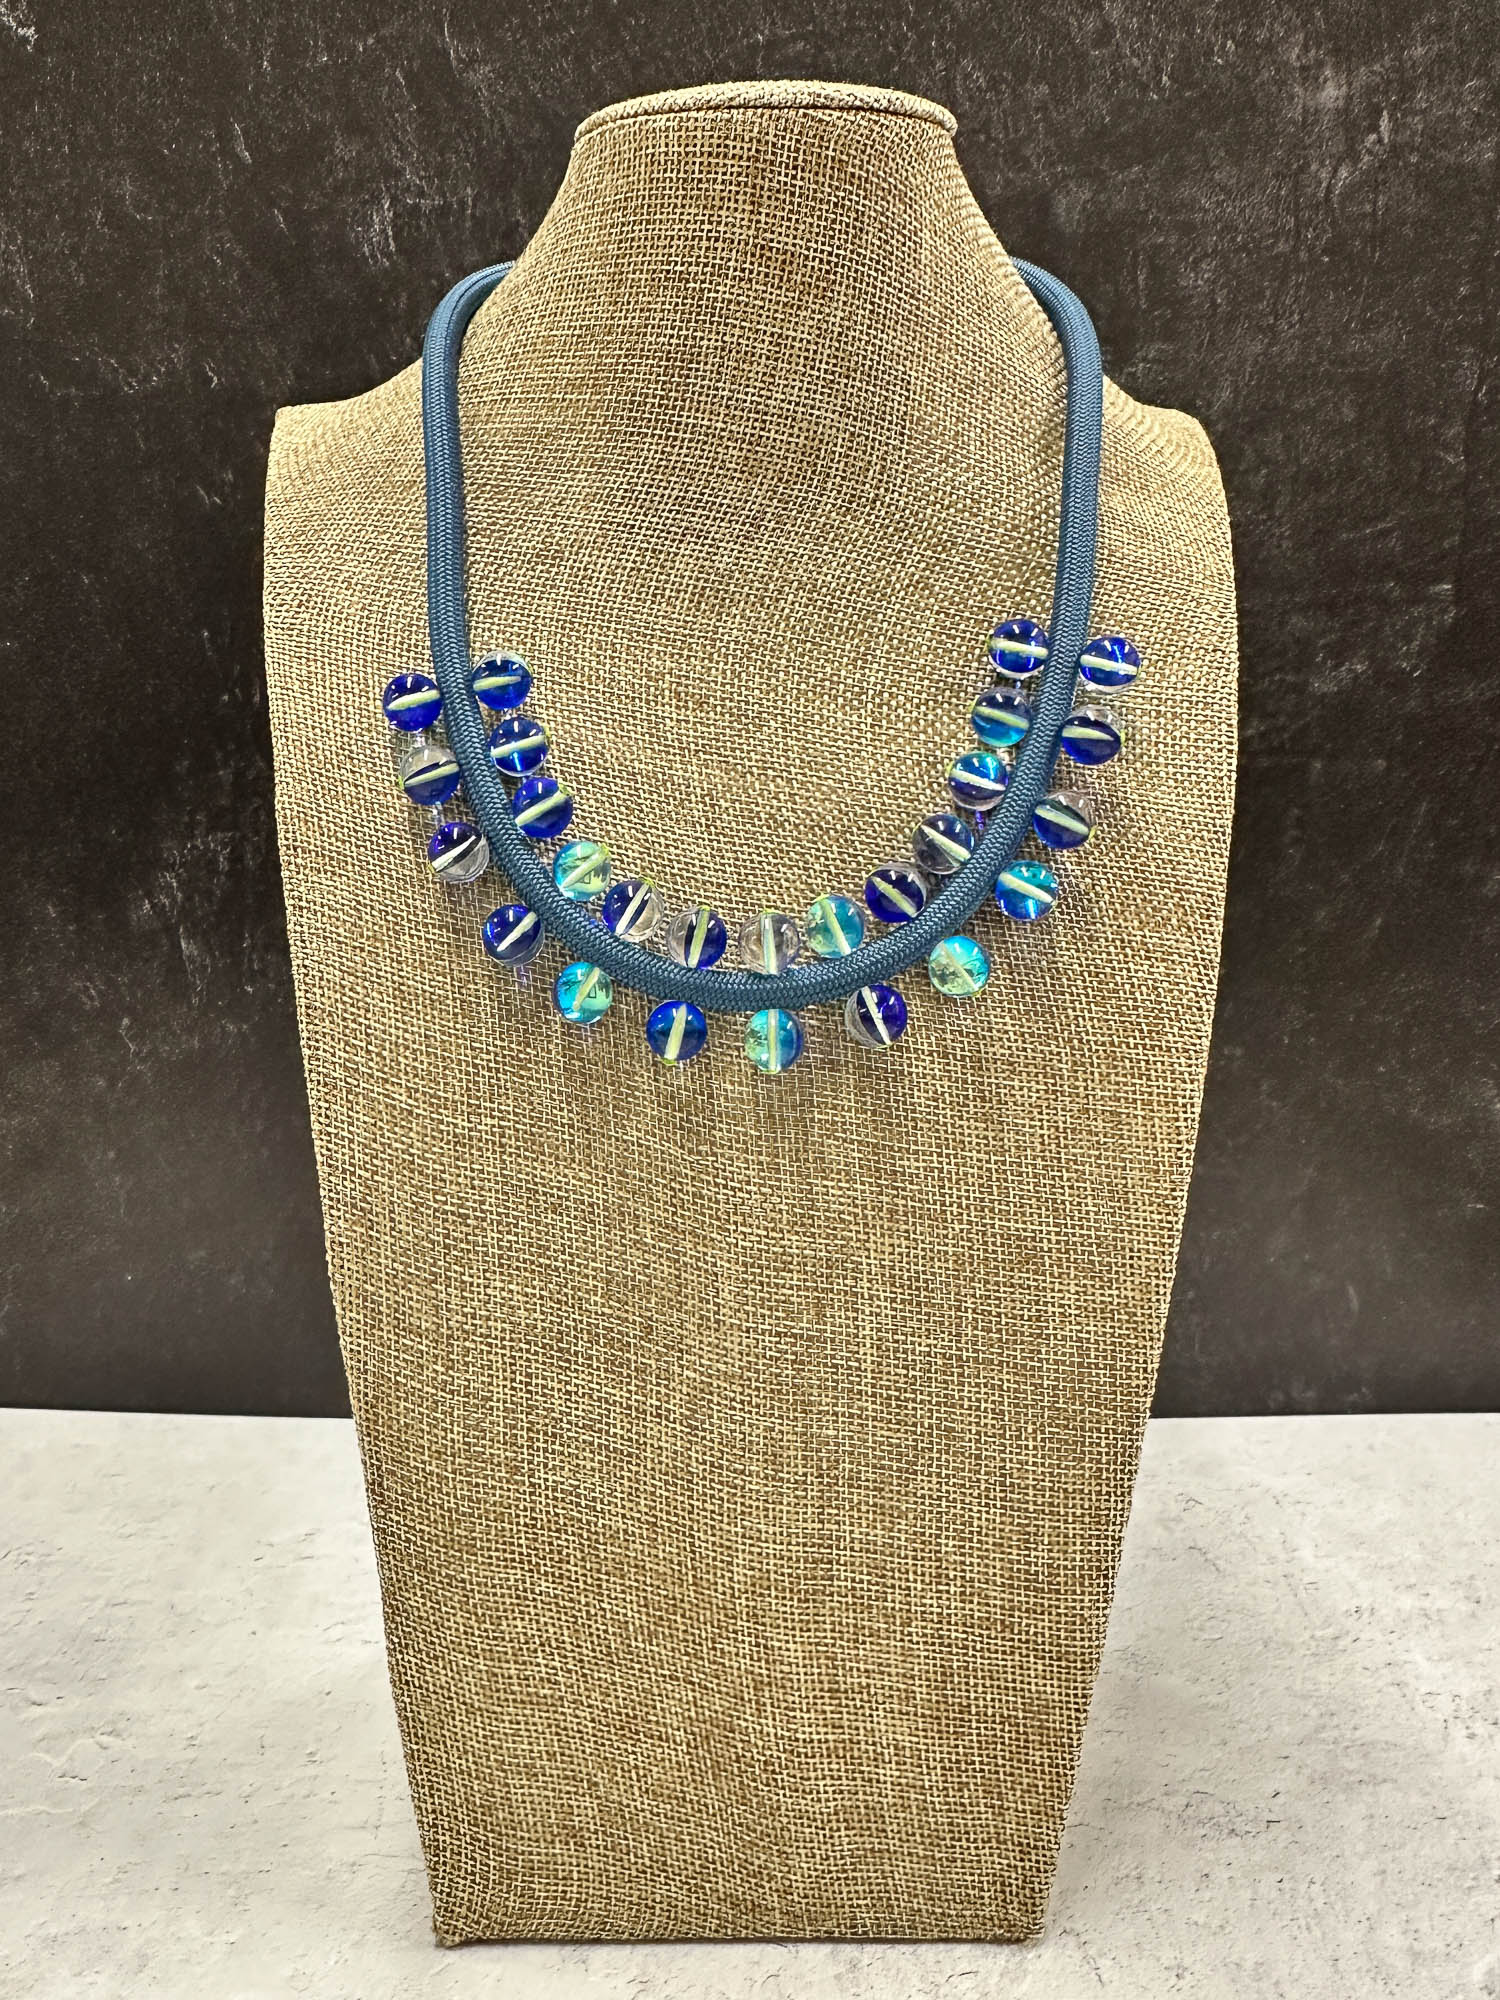 Glass Beads on Cord Necklace, Blue